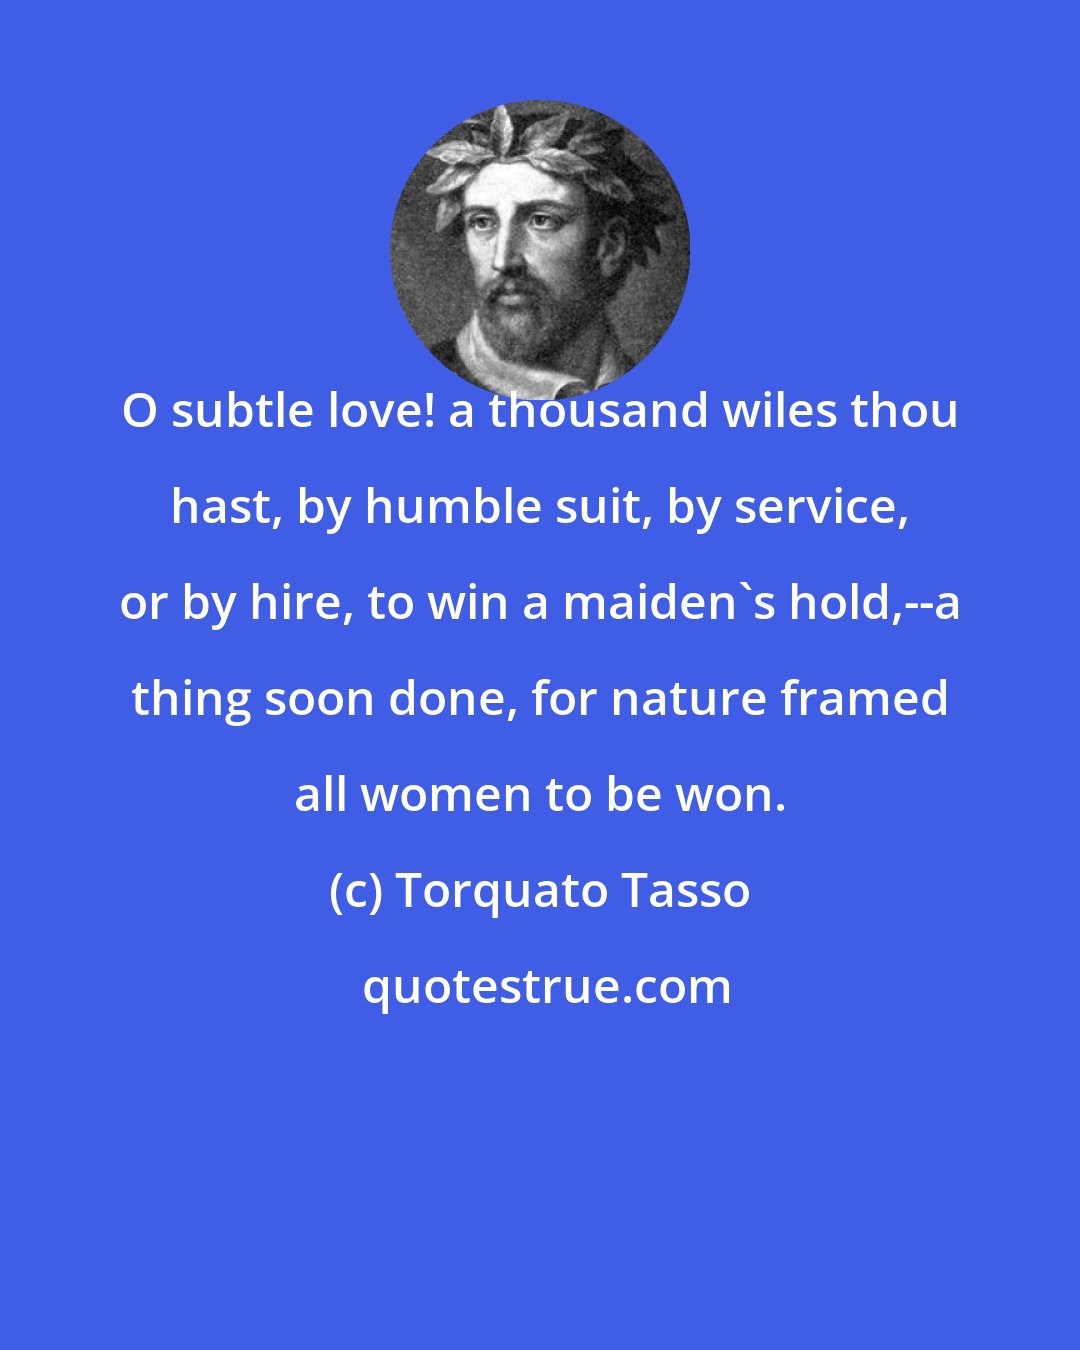 Torquato Tasso: O subtle love! a thousand wiles thou hast, by humble suit, by service, or by hire, to win a maiden's hold,--a thing soon done, for nature framed all women to be won.